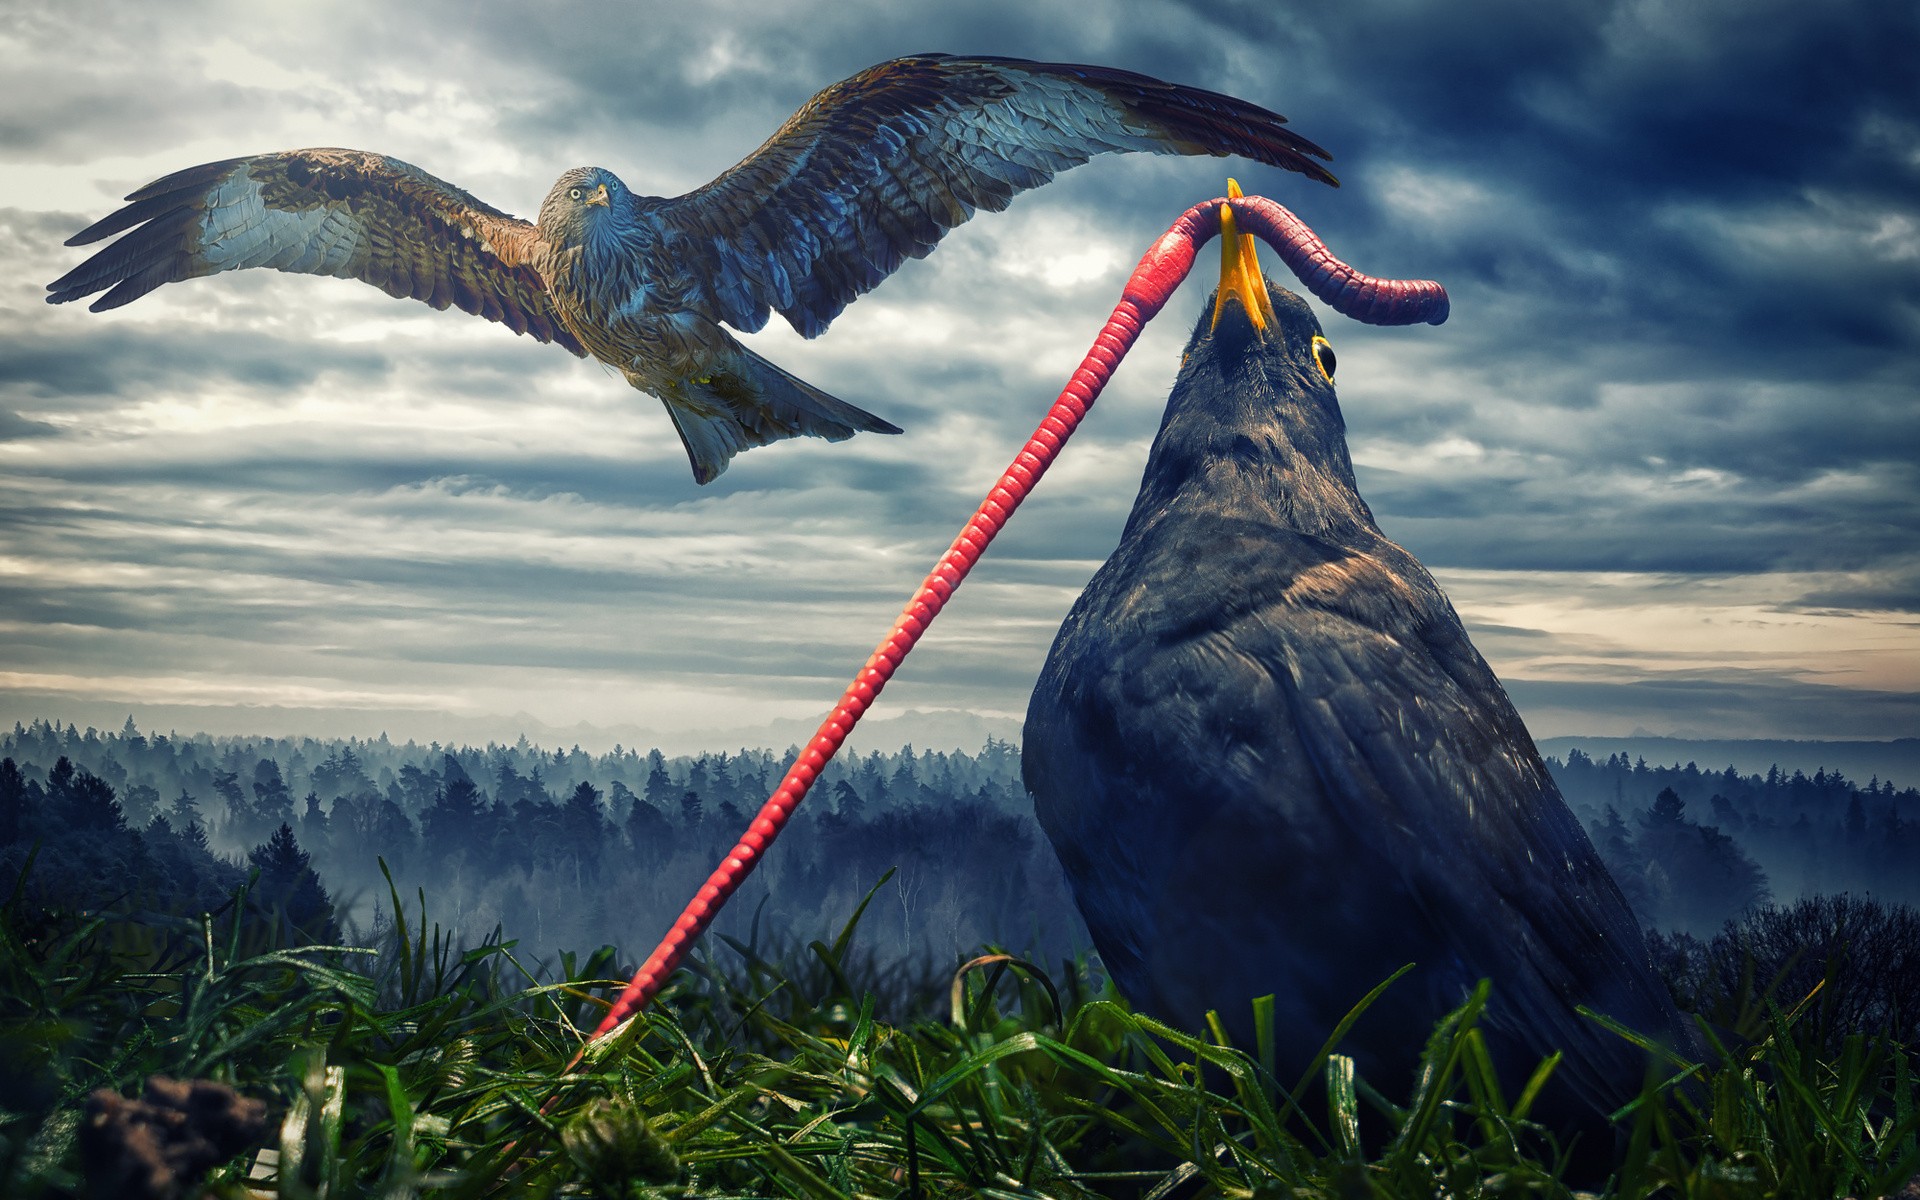 General 1920x1200 nature animals digital art birds worm humor flying grass trees forest clouds hawks 500px